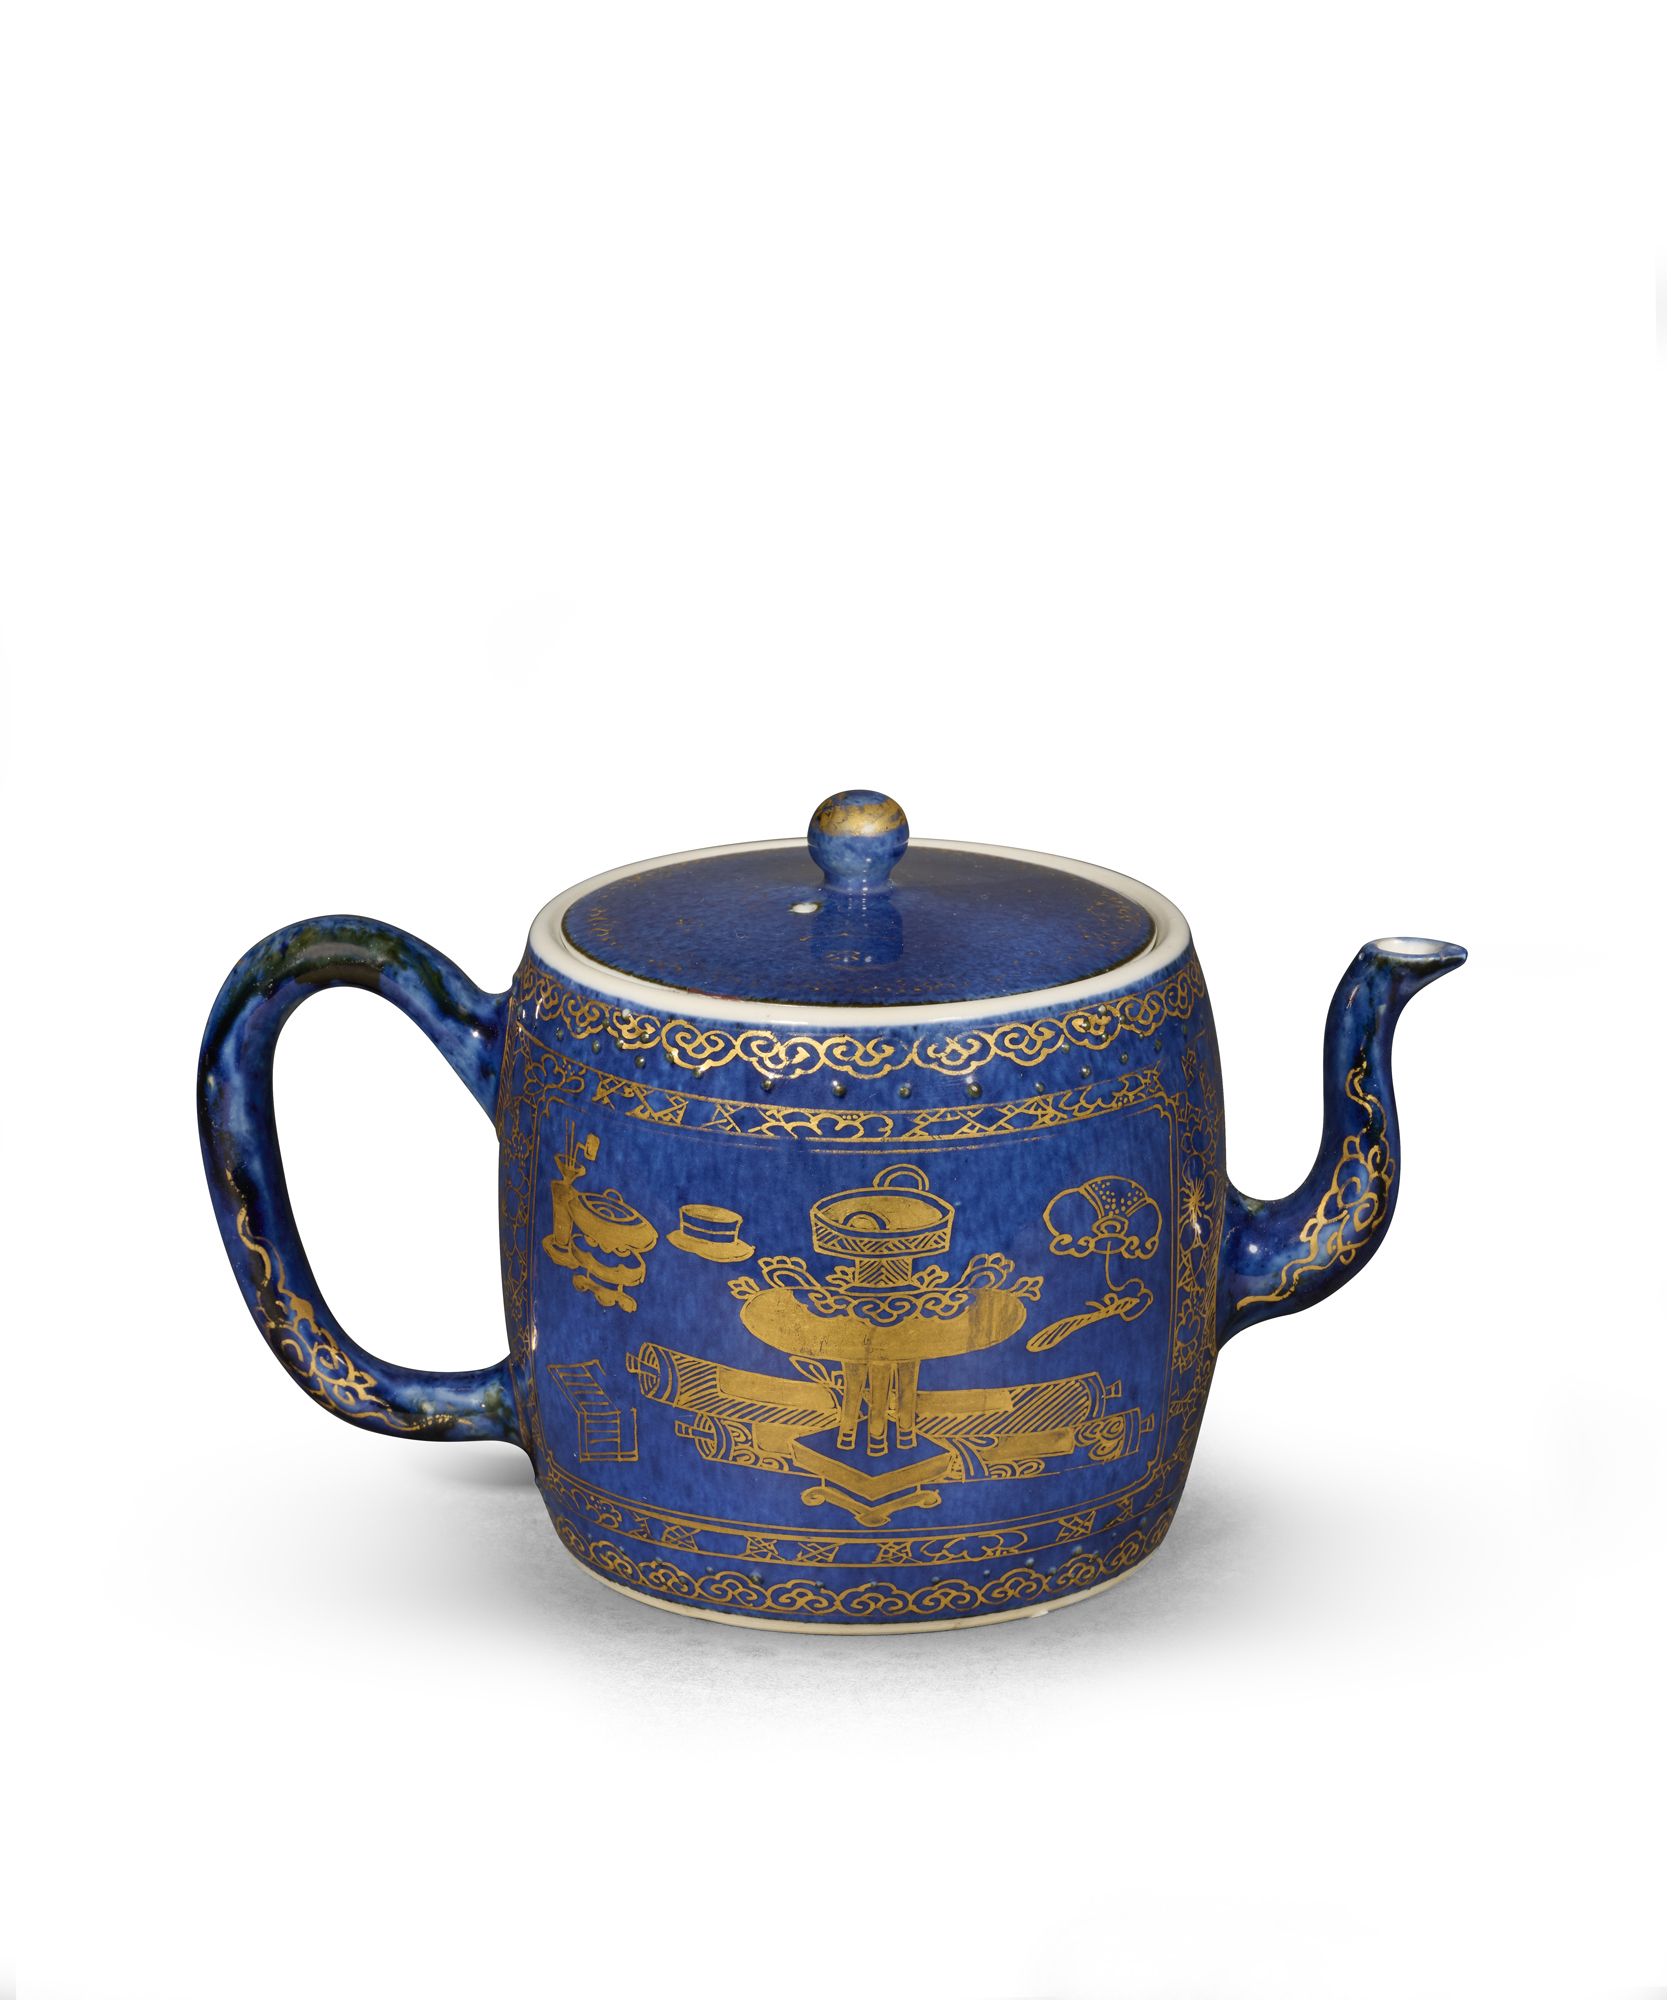 Teapot and Cover, Porcelain painted in underglaze powder blue and overglaze gold, China - Qing dynasty, Kangxi period (1662-1722), H. 10 cm L. 16 cm W. 9 cm